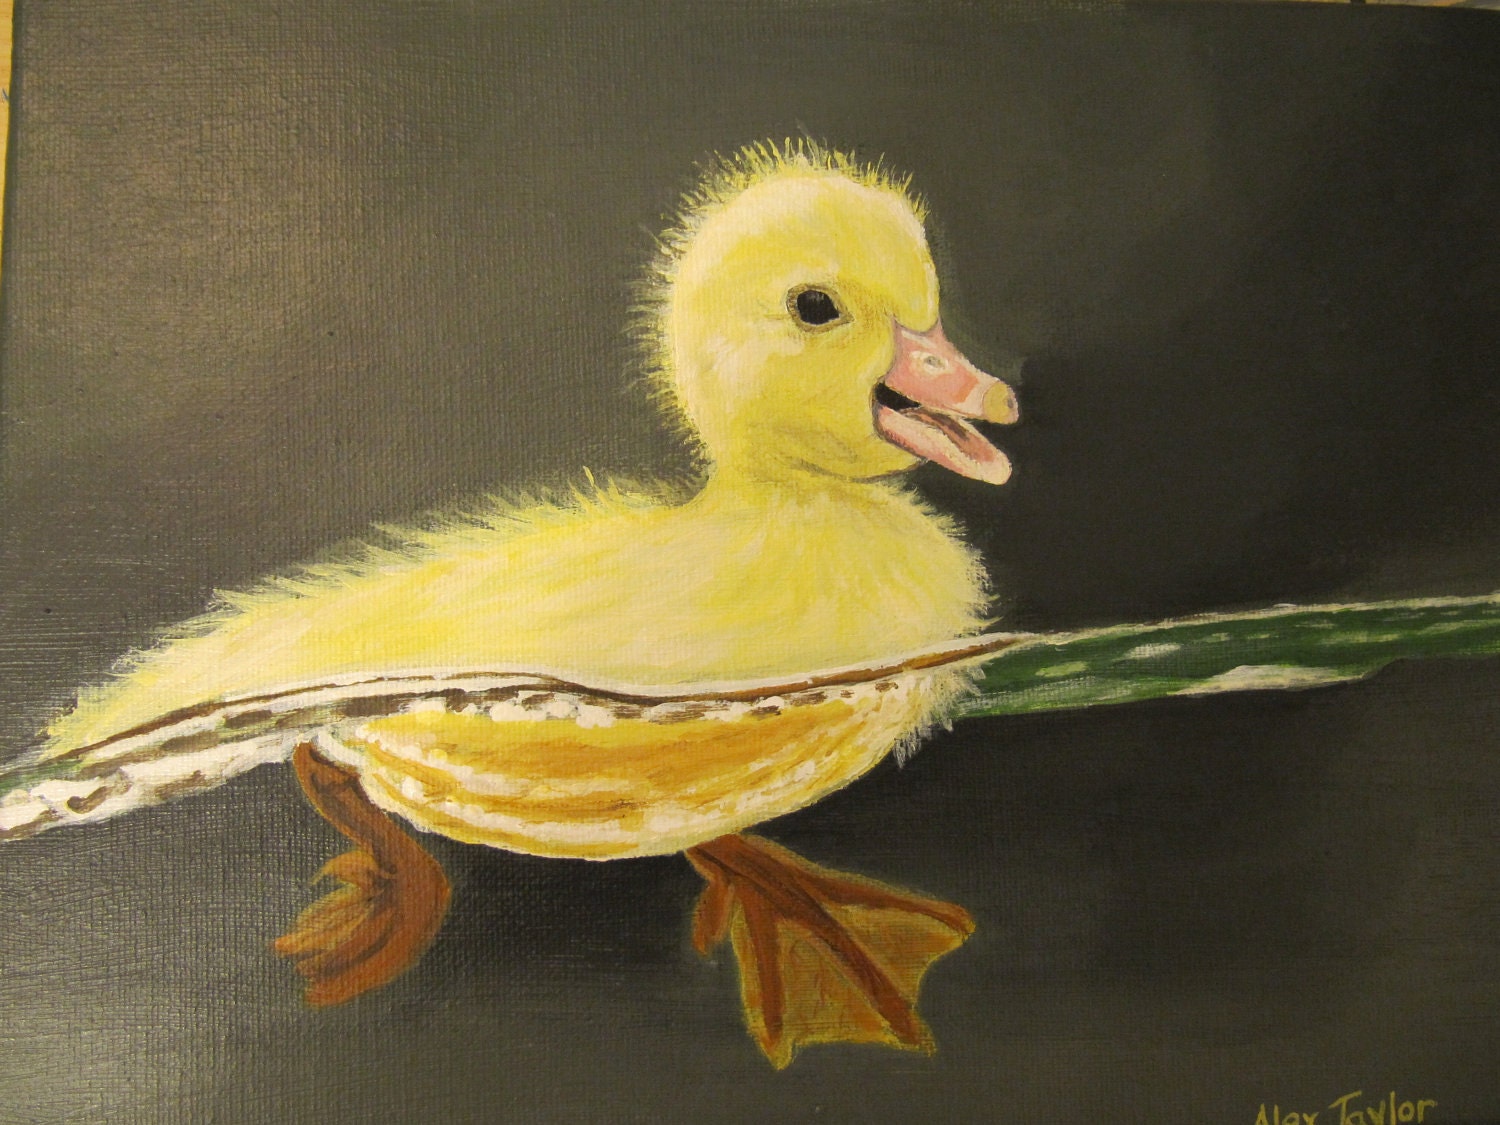 Baby duck's first swim-original acrylic painting on canvas